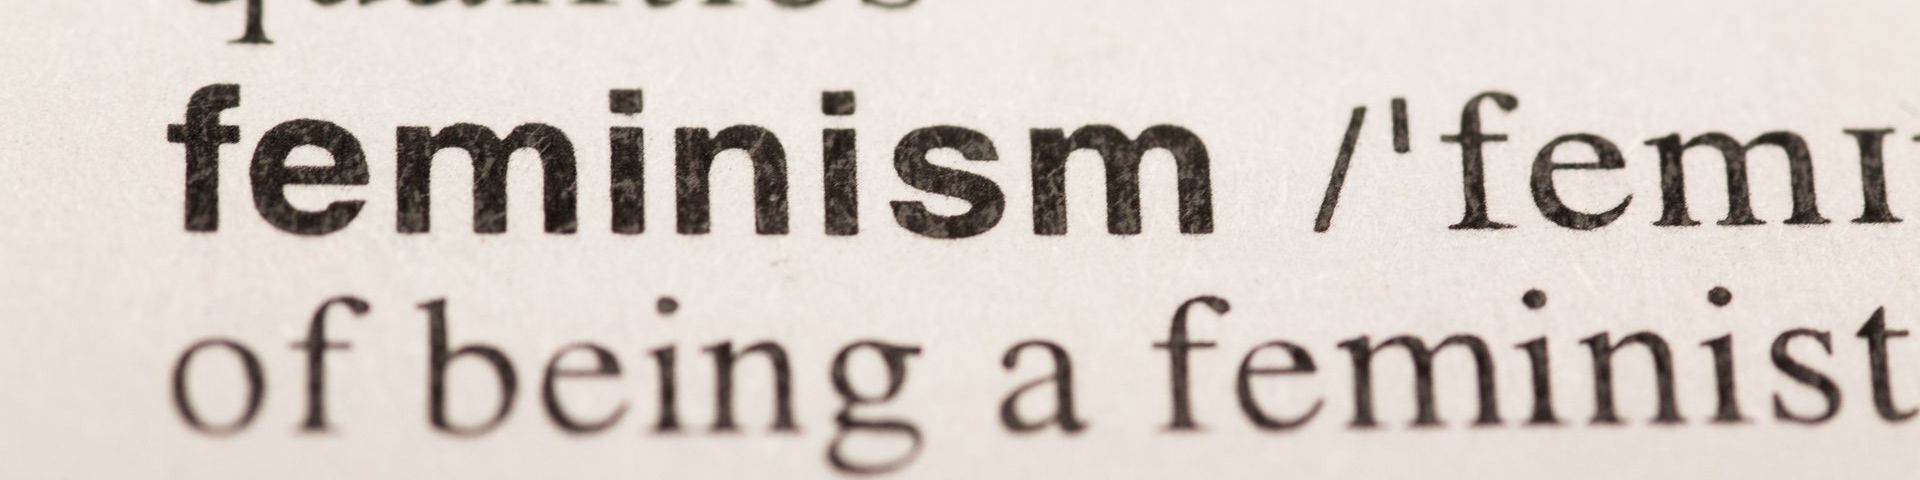 A close up photo of the dictionary definition of feminism. The words shown on the first lineare are ‘Feminism/’femi’. The second line shows the words ‘of being a feminist’.